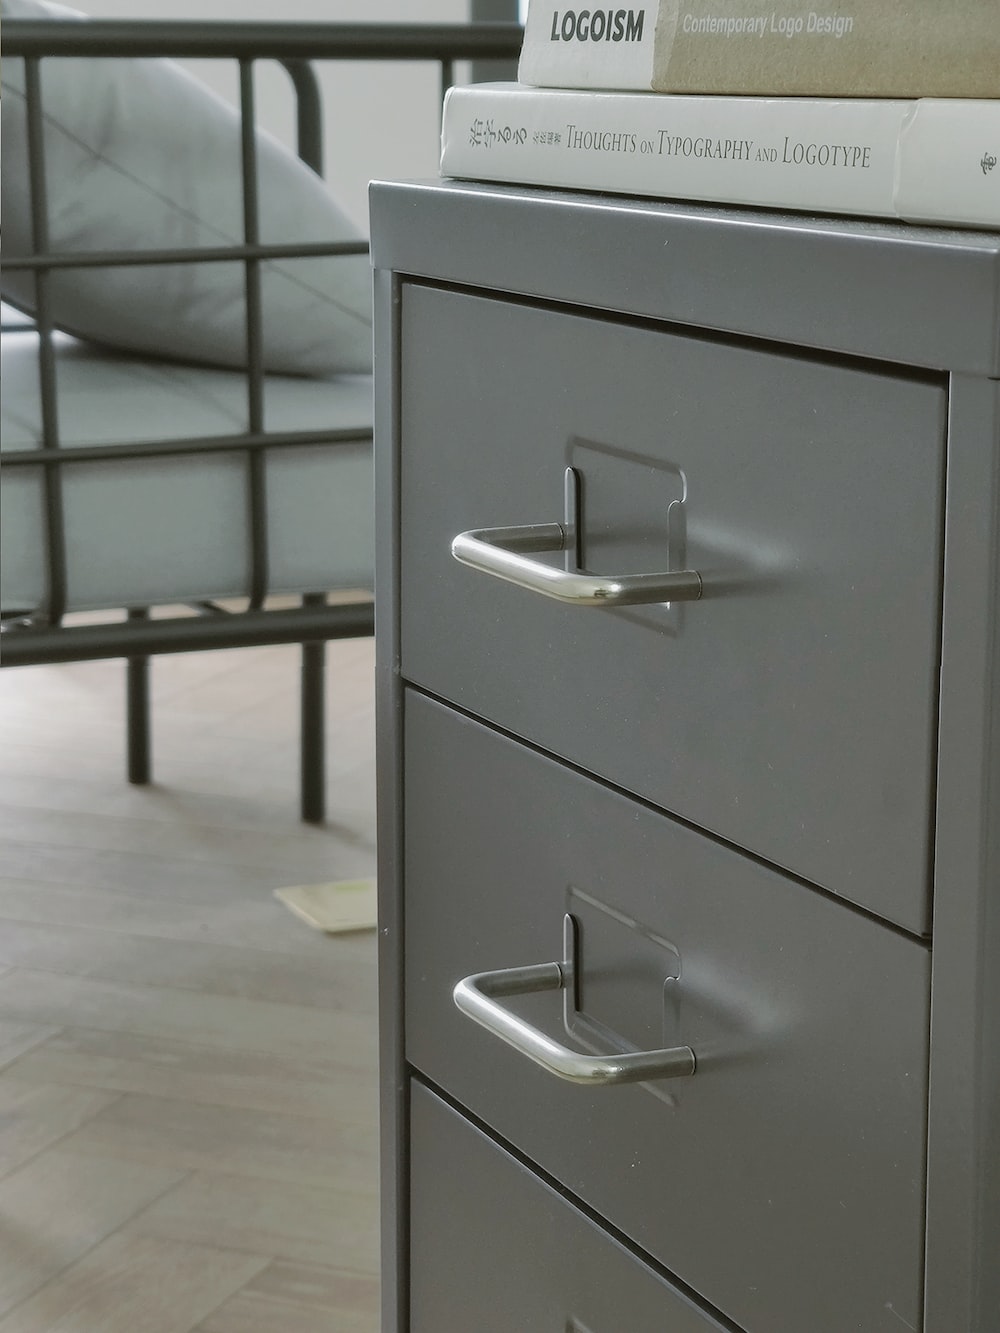 What are the dimensions of a lateral filing cabinet?